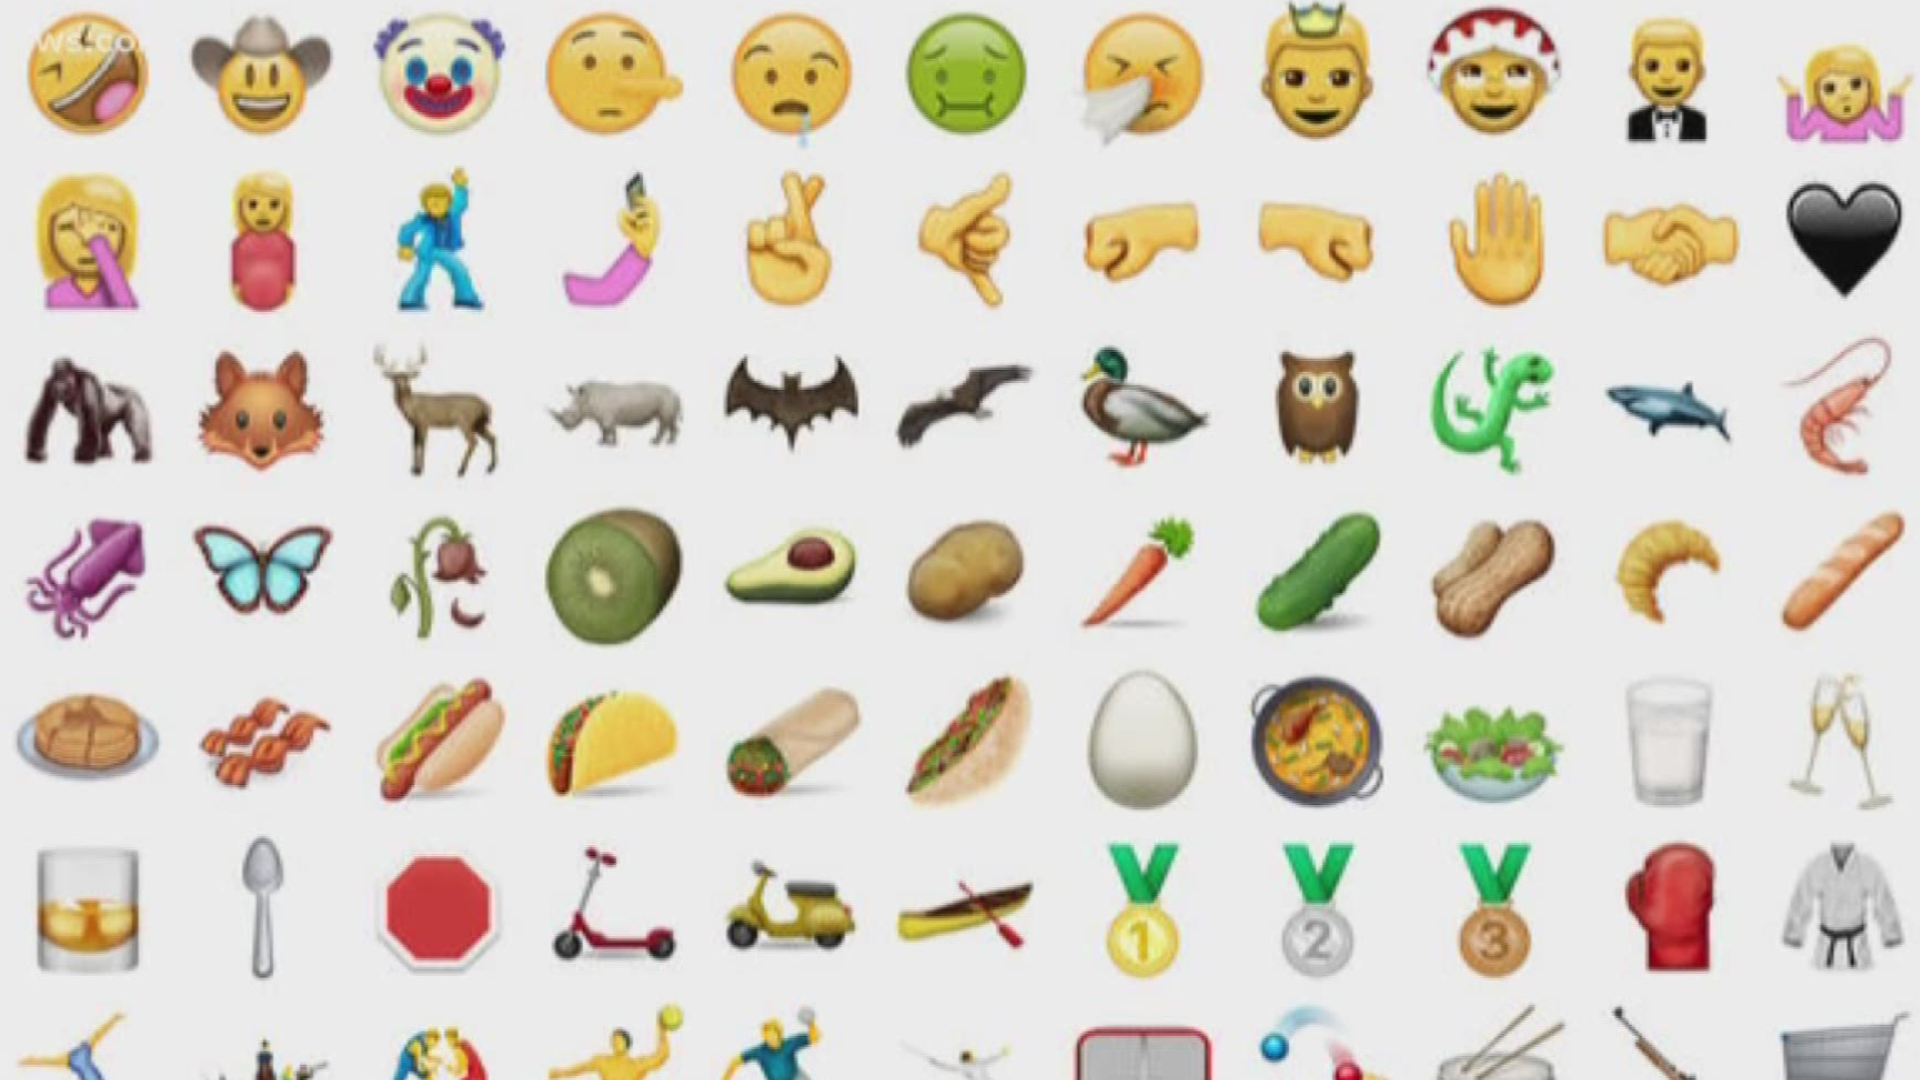 After being around for nearly a decade, emojis are starting to make their way into the world of litigation.